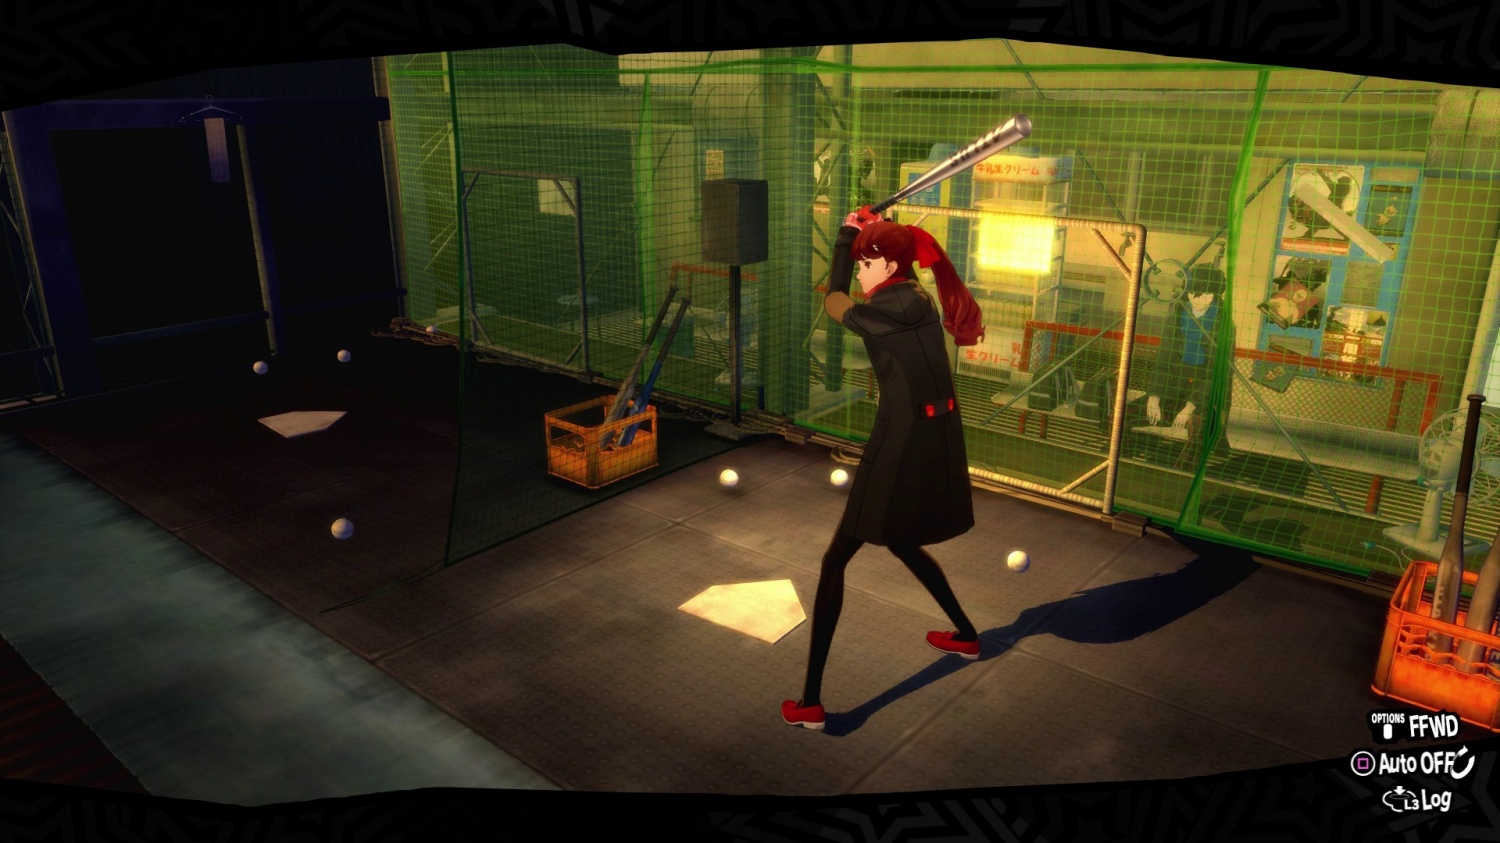 Persona 5 Royal – New Videos Show Off Changes To Palaces And Gameplay